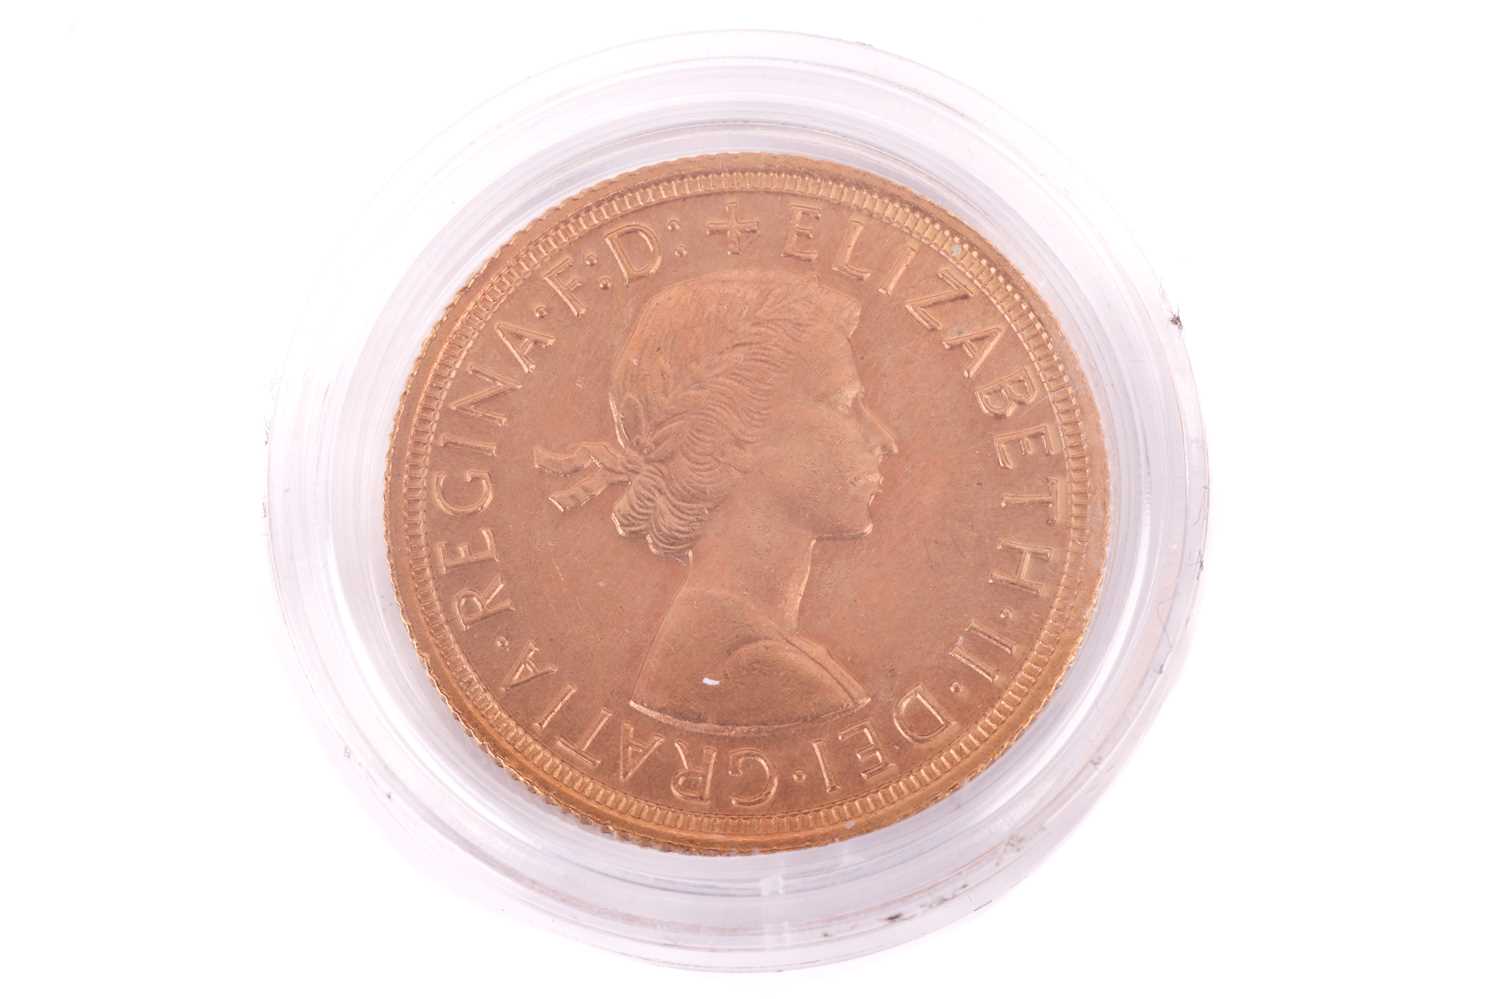 A 1964 Elizabeth II Full-Sovereign with a plastic case, circulated. - Image 2 of 2